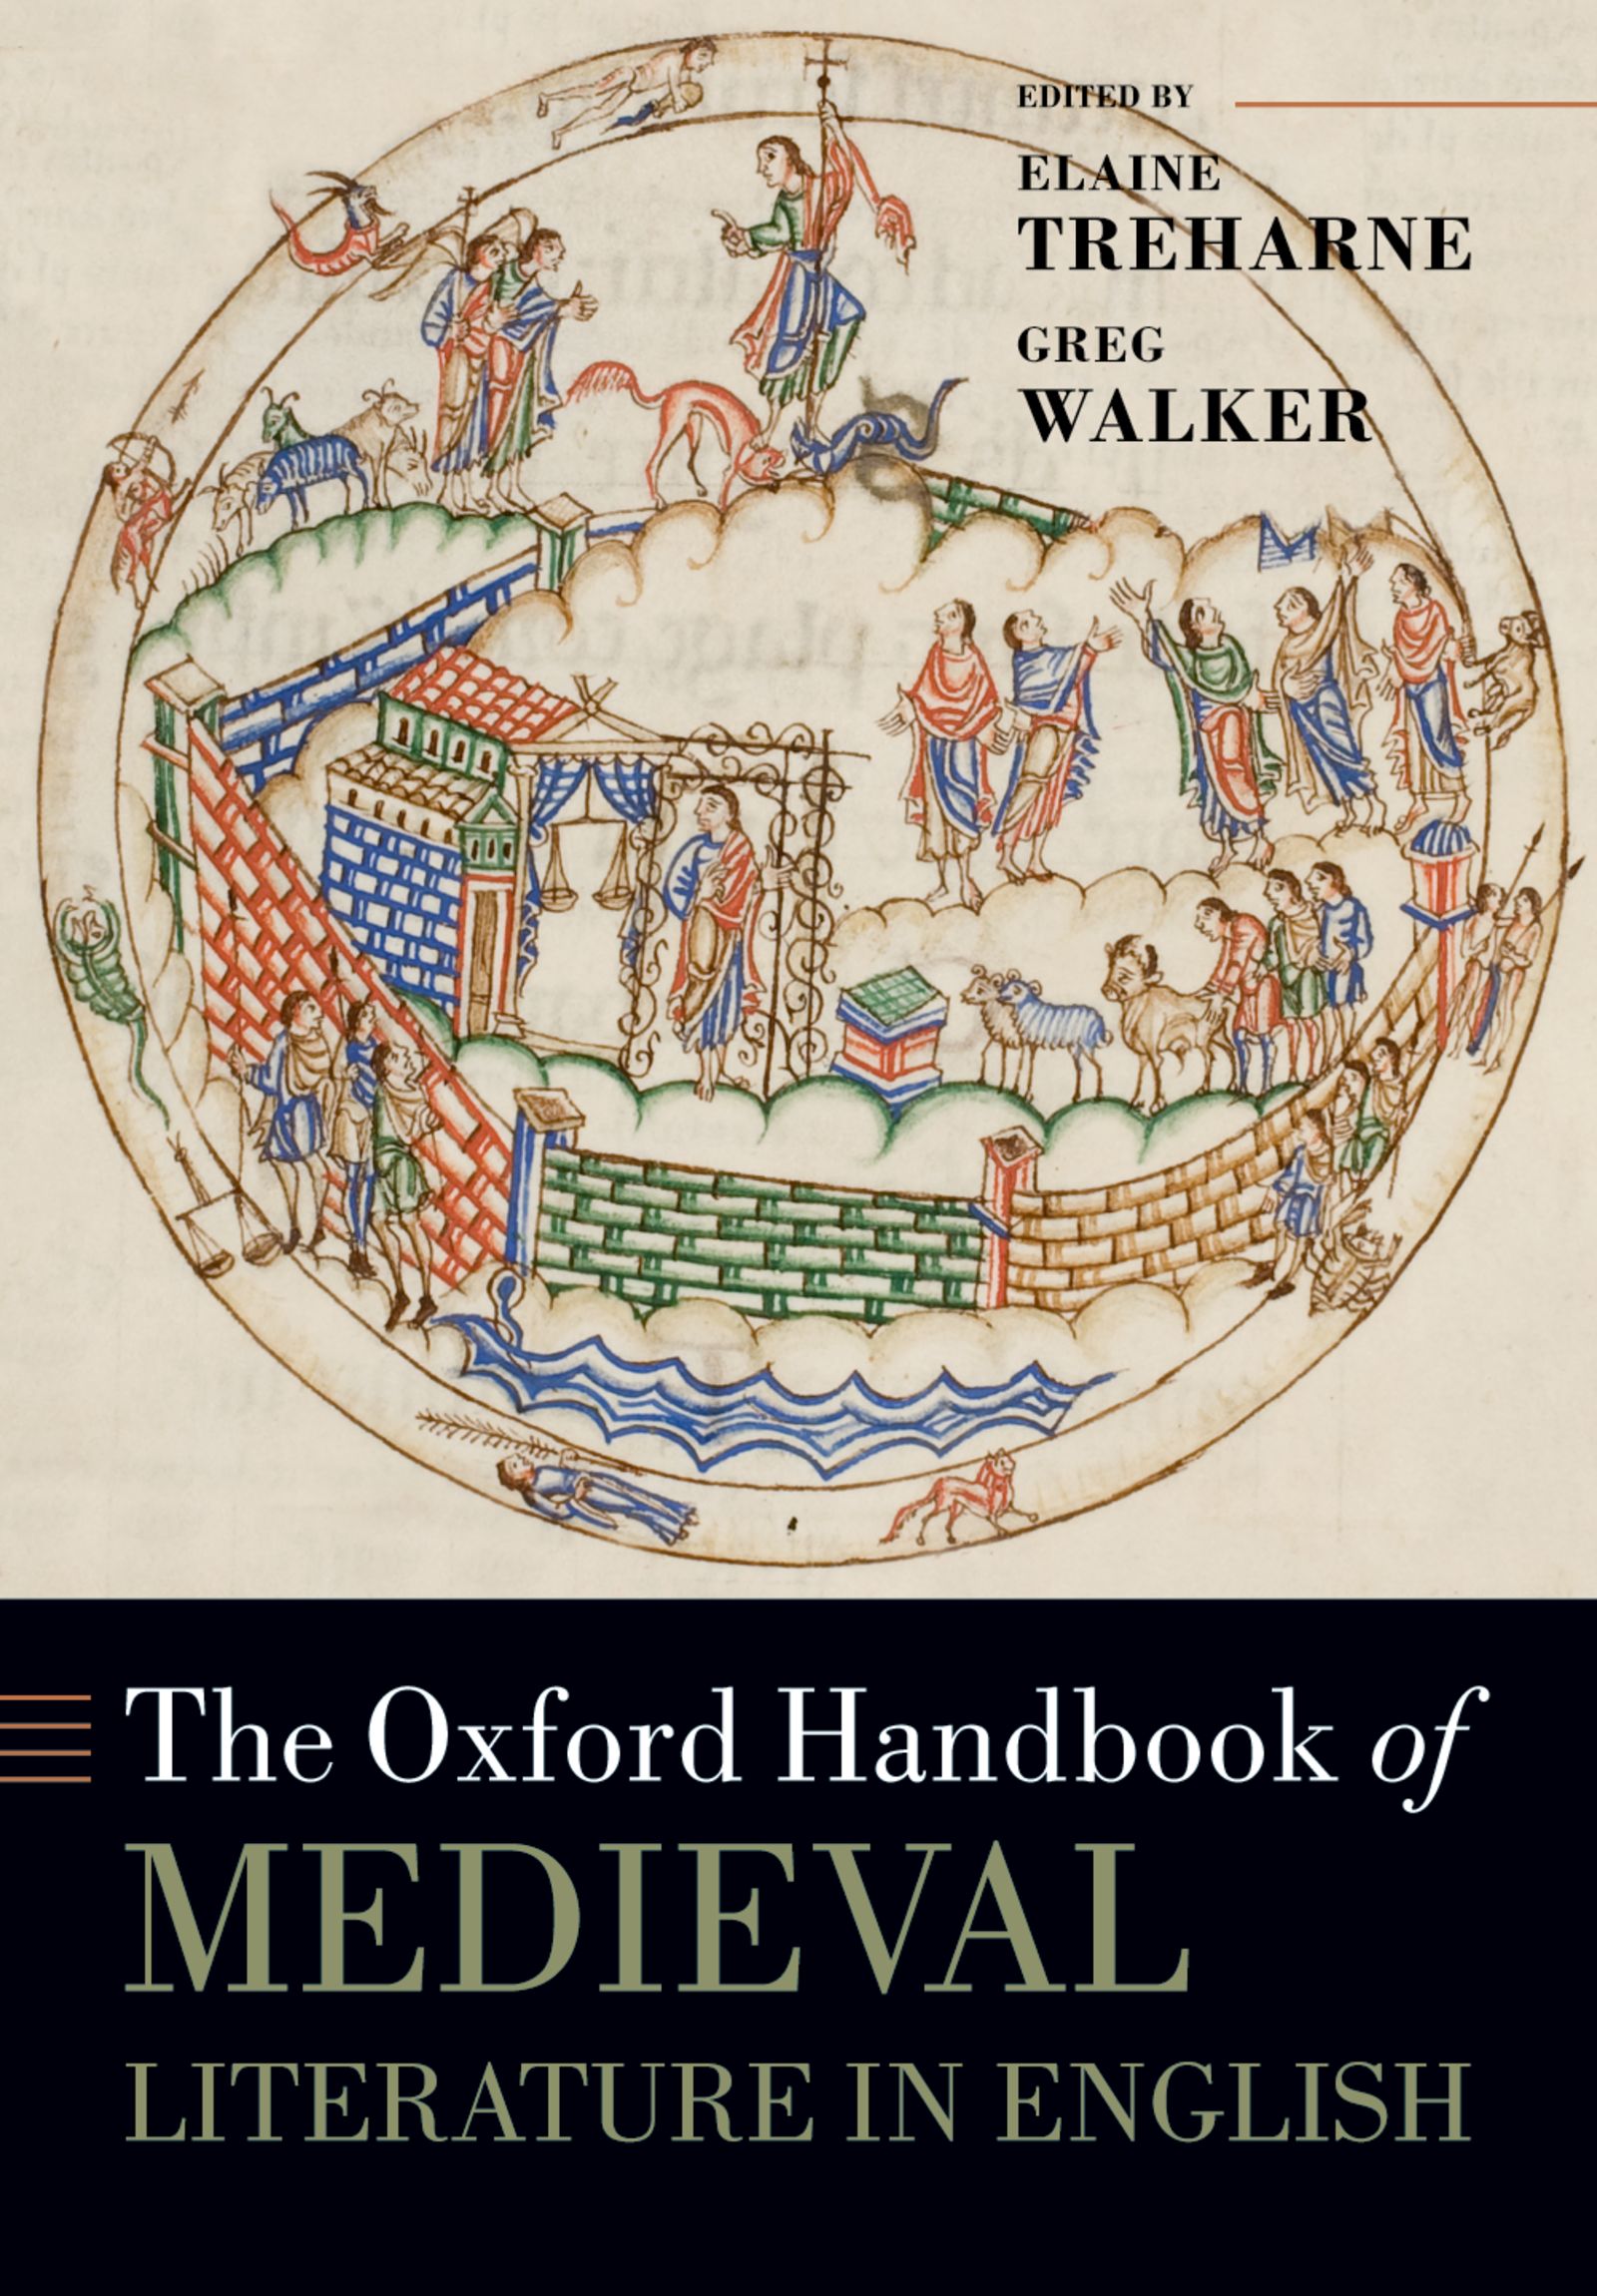 The Oxford Handbook of Medieval Literature in English - 25-49.99